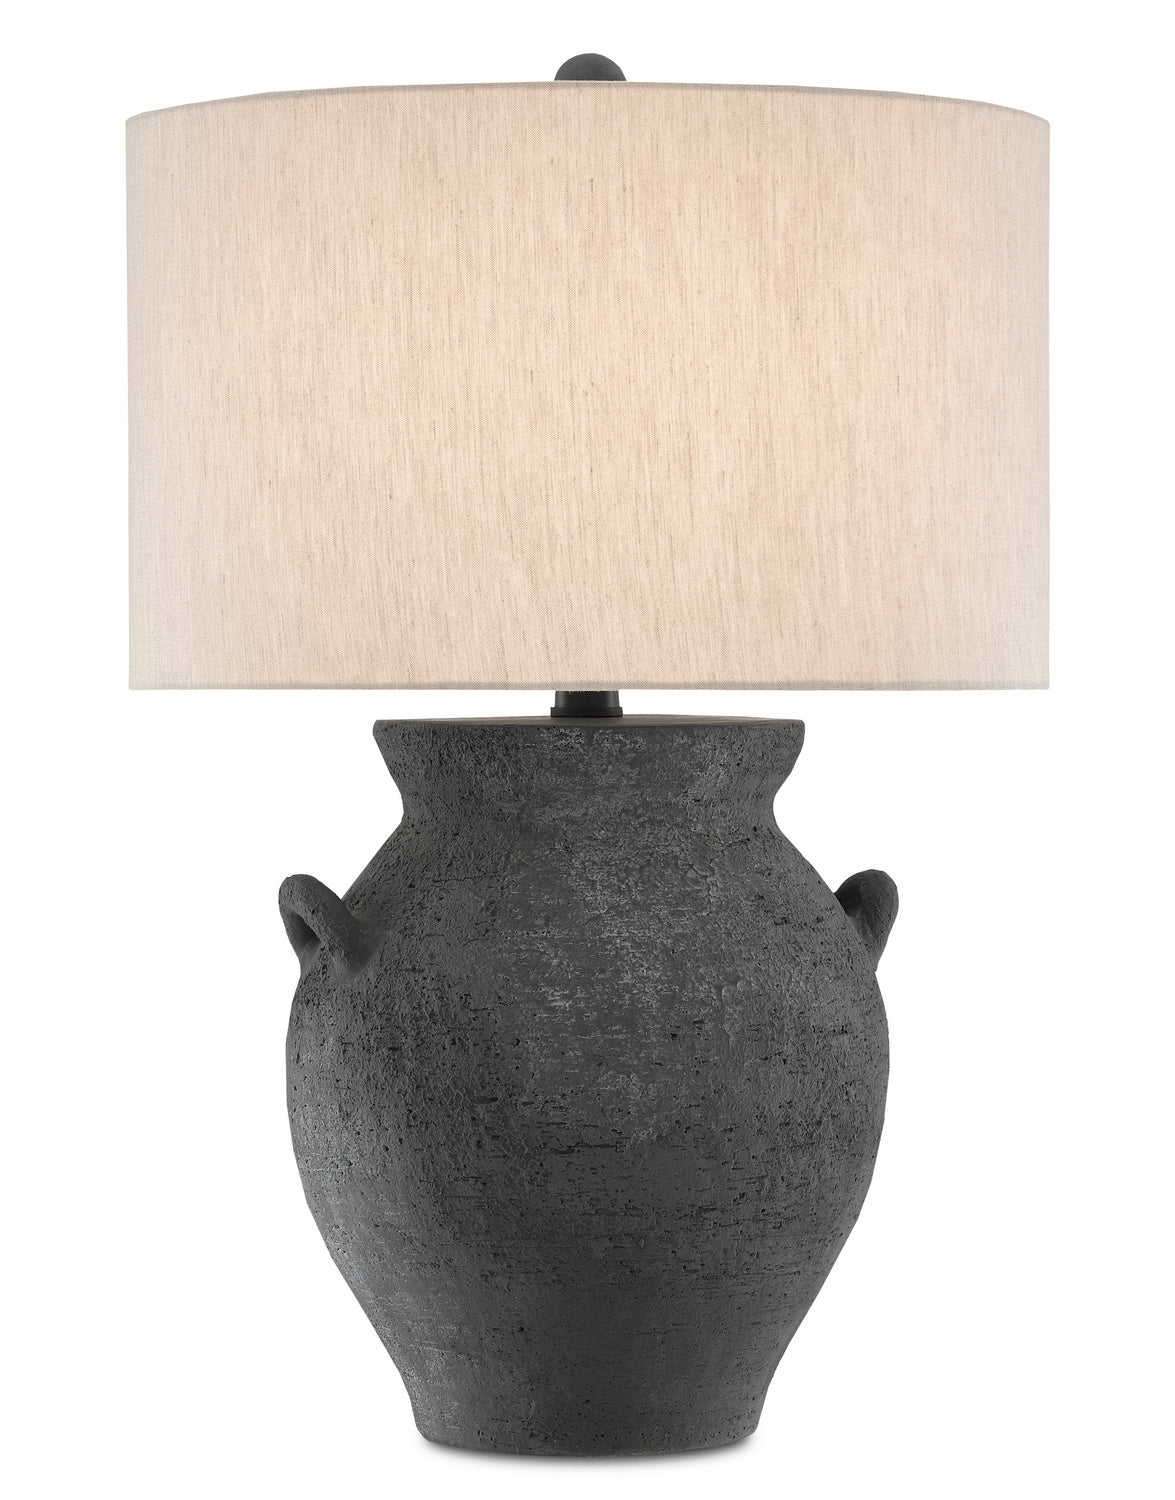 One Light Table Lamp from the Anza collection in Black Ash/Satin Black finish